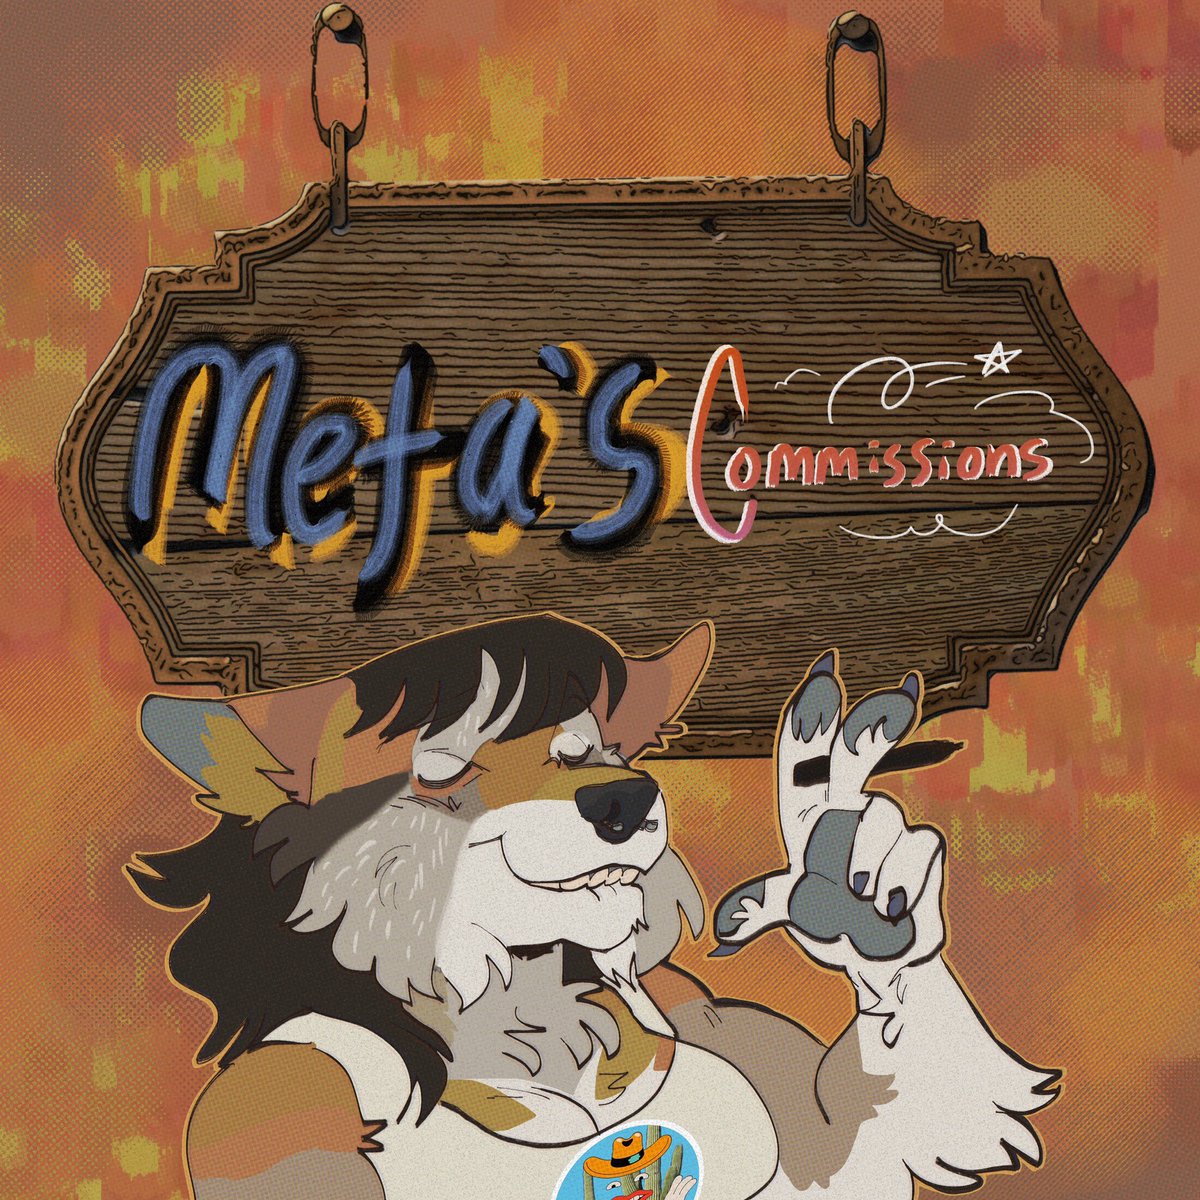 🌲🌞🍂🌾🌲 ———————— com/mission info thread! - p.s all my com/missions r paid via p4yp4l ! - dms are open for inquiries, rts and likes very appreciated!! ———————— IG: metastatiic TT: metastatiic TH: metastatiic 🌲🌞🍂🌾🌲